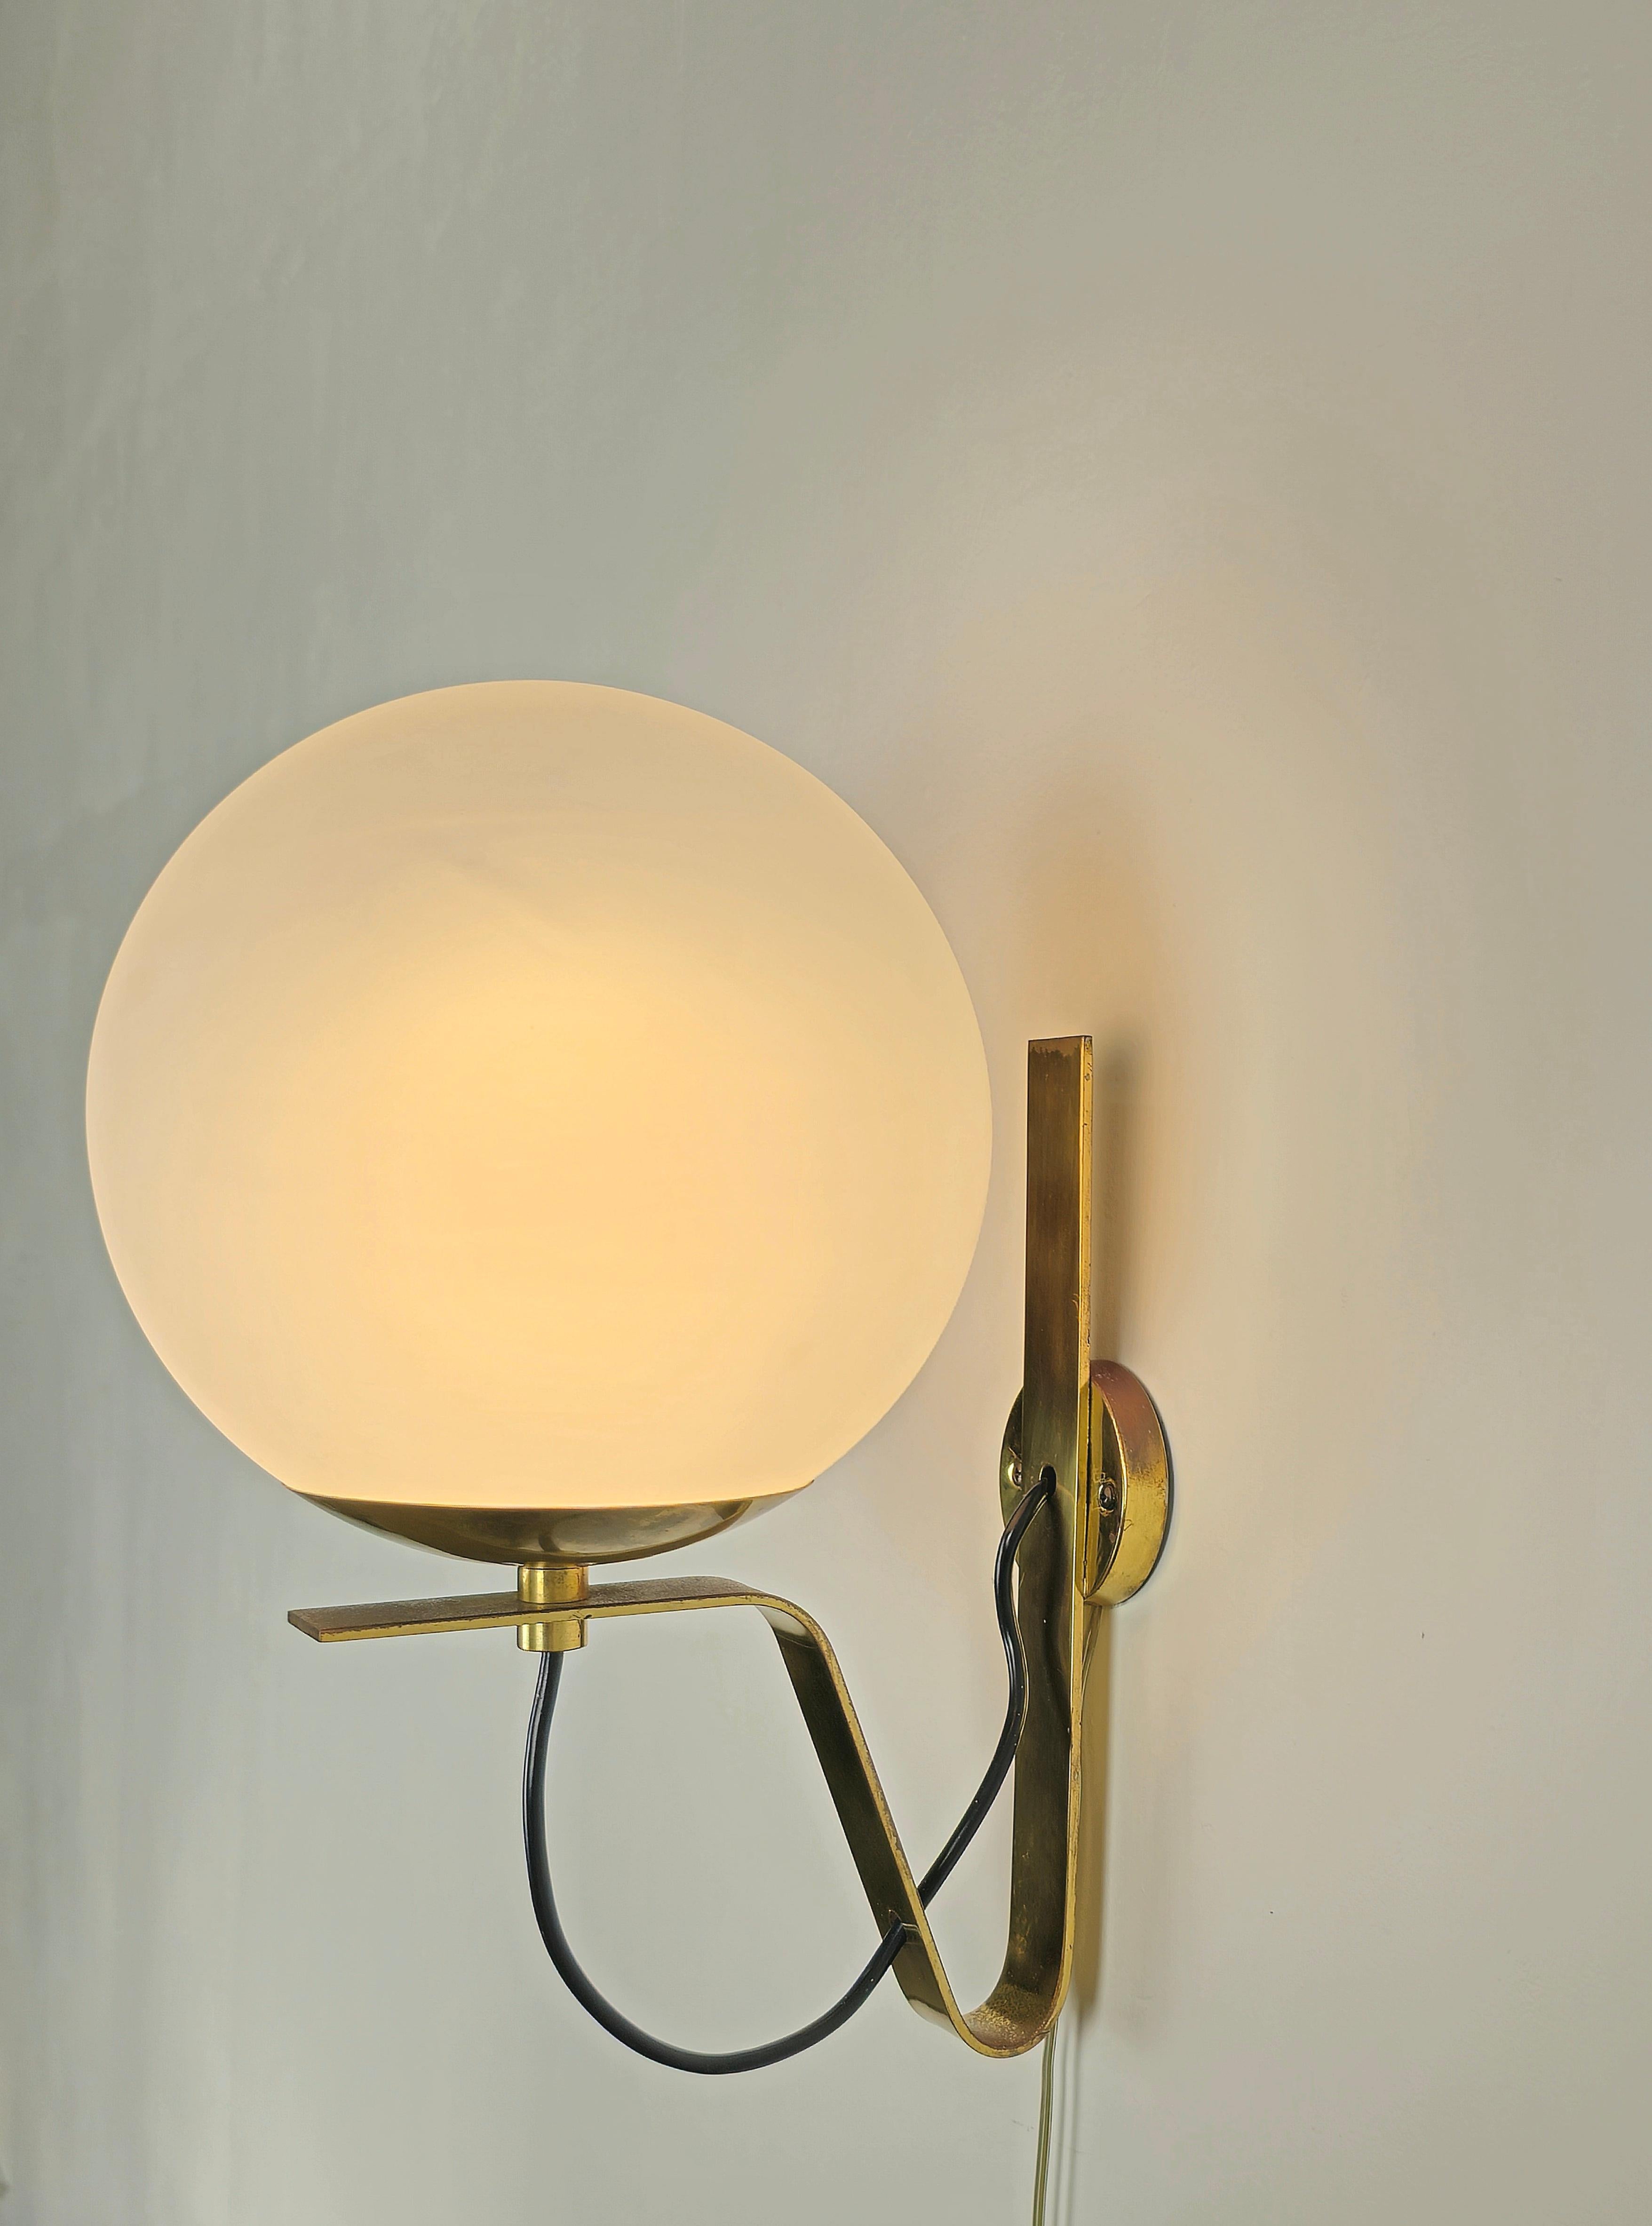 Wall lamps designed by the well-known designer Sergio Asti and produced by Artemide in the 60s. The wall lamp has a structure with curved brass bands which supports a spherical sandblasted white glass.



Note: We try to offer our customers an